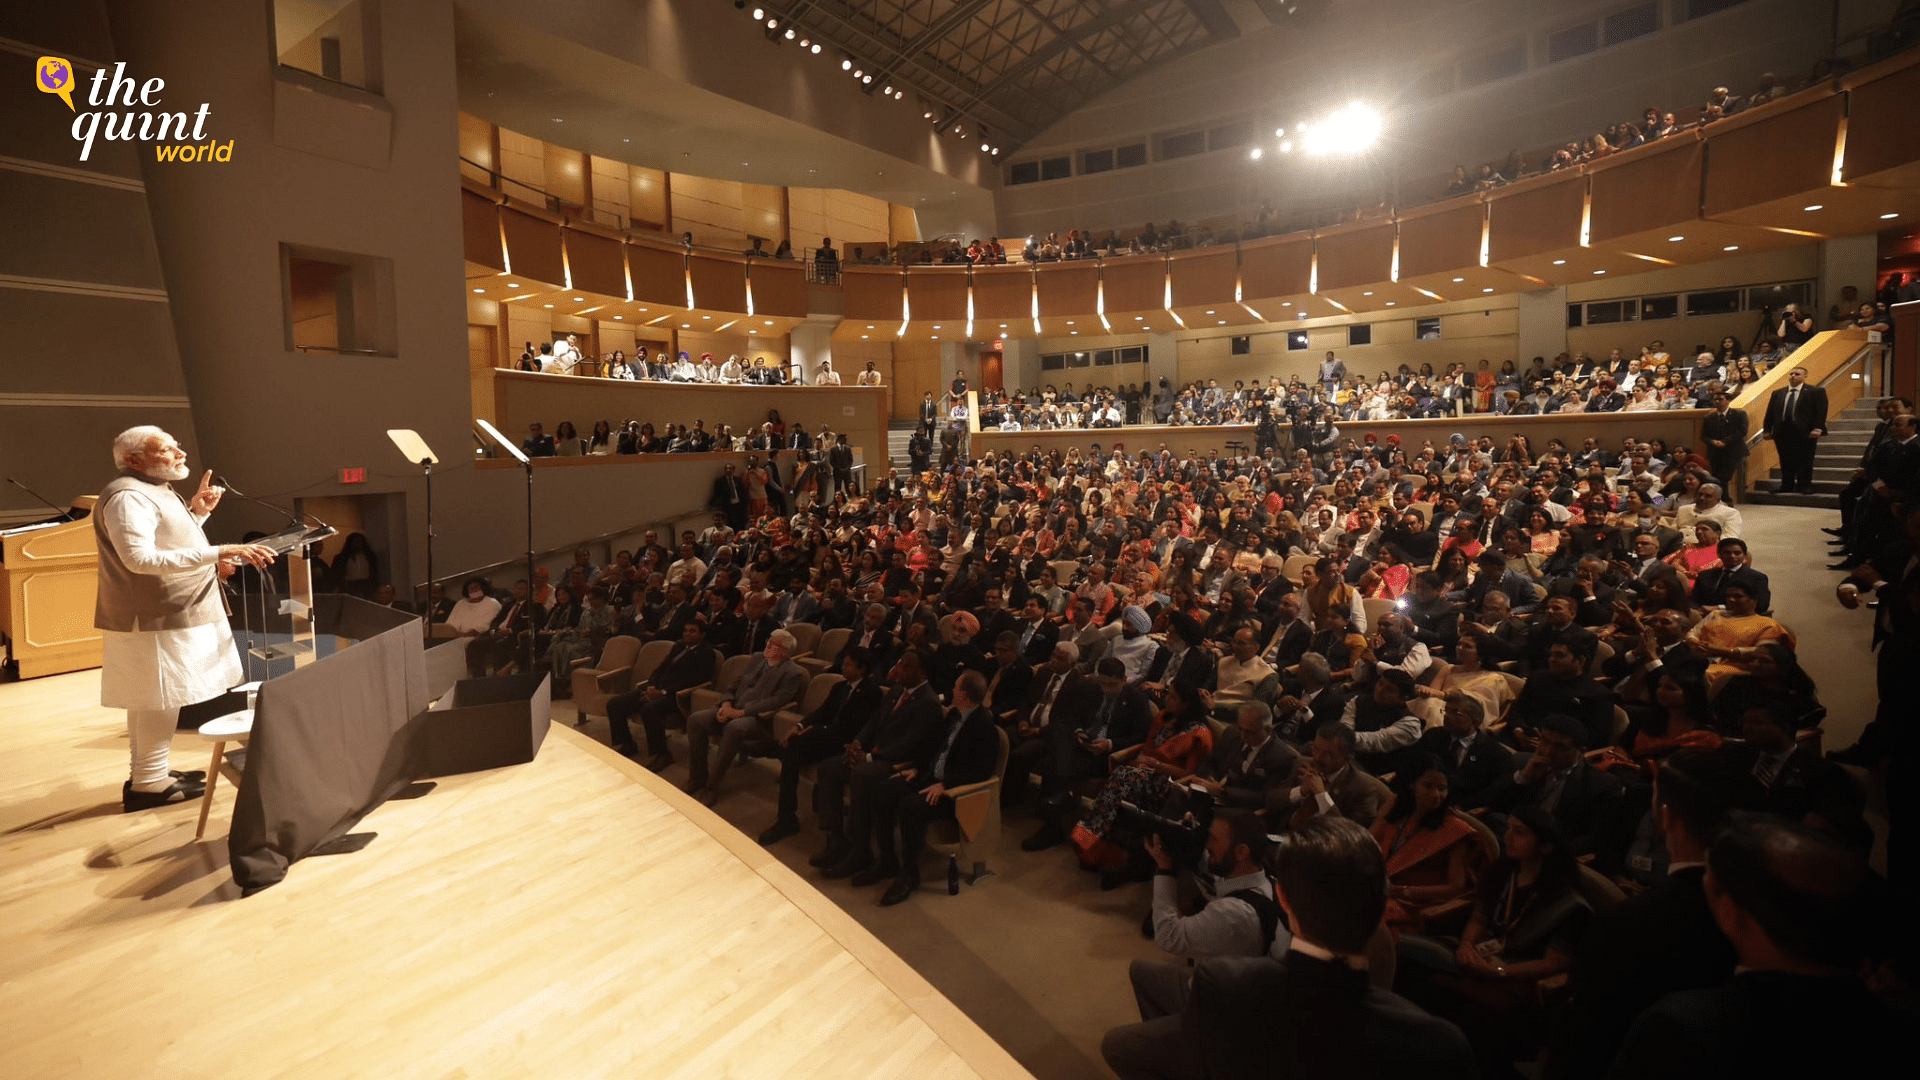 <div class="paragraphs"><p>Prime Minister Narendra Modi addressed a large crowd of Indian diaspora members in an invite-only event at the Ronald Reagan center in Washington, the conclusion of his three-day State visit to the United States.</p></div>